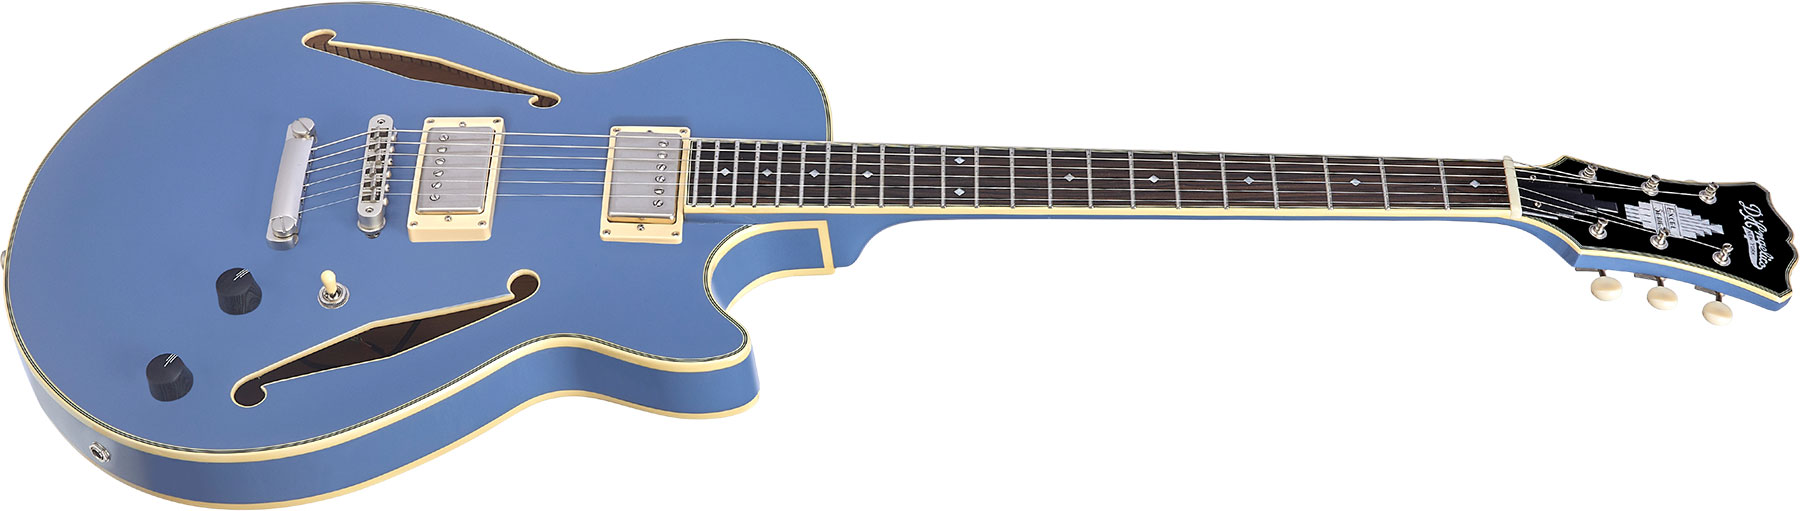 D'angelico Ss Tour Excel 2h Ht Eb - Slate Blue - Semi-hollow electric guitar - Variation 1